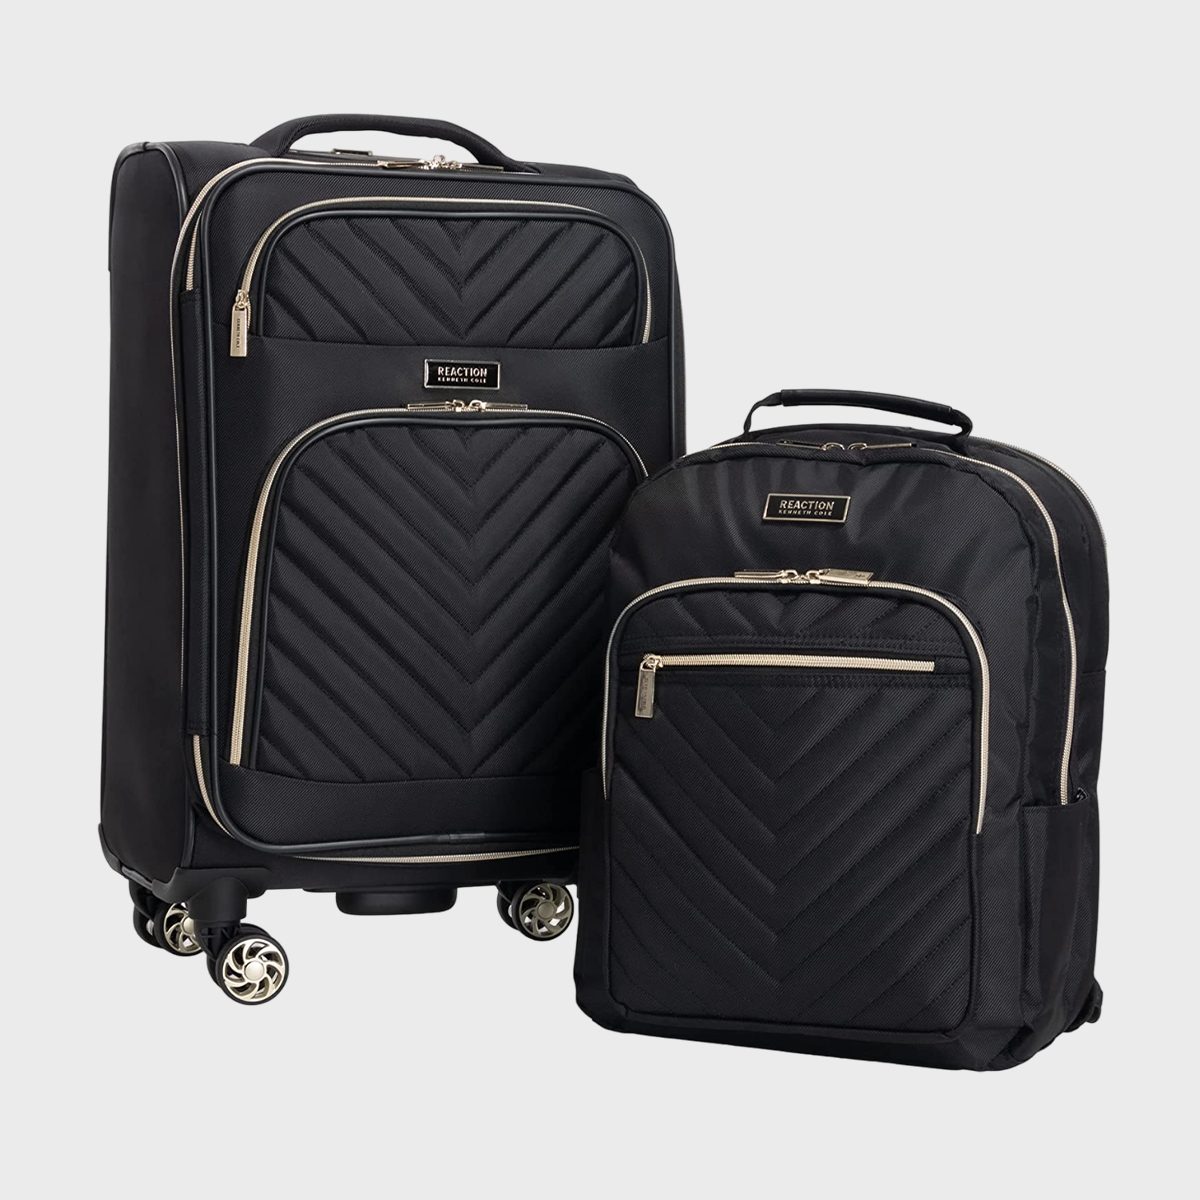 <h3>Kenneth Cole Reaction Chelsea Luggage Collection</h3> <p>This <a href="https://www.amazon.com/Kenneth-Cole-Reaction-Expandable-Suitcase/dp/B07T4DYXPG" rel="noopener">Kenneth Cole luggage set</a> includes a soft-sided carry-on and a matching backpack. Crafted with a stylish chevron-patterned fabric, both pieces are lightweight and fashion-forward. The tear-resistant interior provides an added layer of security for your belongings. The rolling <a href="https://www.rd.com/list/amazon-carry-on-luggage/">Amazon luggage</a> is expandable, allowing for an extra 1.5 inches of storage capacity. On the other hand, the backpack not only features a padded laptop compartment but also numerous pockets, offering hands-free convenience for storing personal items and in-flight essentials.</p> <p>"Wife brought it to her office and her workmates were fawning over the design," writes <a href="https://www.amazon.com/gp/customer-reviews/R2S4MHC5MGVUCS/" rel="noopener">Ken C.</a> in his five-star review of this <a href="https://www.rd.com/list/best-luggage-sets/">luggage set</a>. "She loves how light it is, how the spinner wheels tackle terrains with ease and how it carries her heavy laptop and other stuff like a champ."</p> <p><strong>Pros</strong></p> <ul> <li>Two-piece set includes one soft-sided suitcase and a matching backpack</li> <li>Stylish chevron design</li> <li>Wet-garment pocket</li> <li>Elastic clothing compression straps</li> <li>Backpack loops over the telescoping carry-on handle</li> </ul> <p><strong>Cons</strong></p> <ul> <li>The suitcase's small size isn't best suited for longer trips or over-packers</li> </ul> <p class="listicle-page__cta-button-shop"><a class="shop-btn" href="https://www.amazon.com/Kenneth-Cole-Reaction-Expandable-Suitcase/dp/B07T4DYXPG">Shop Now</a></p>